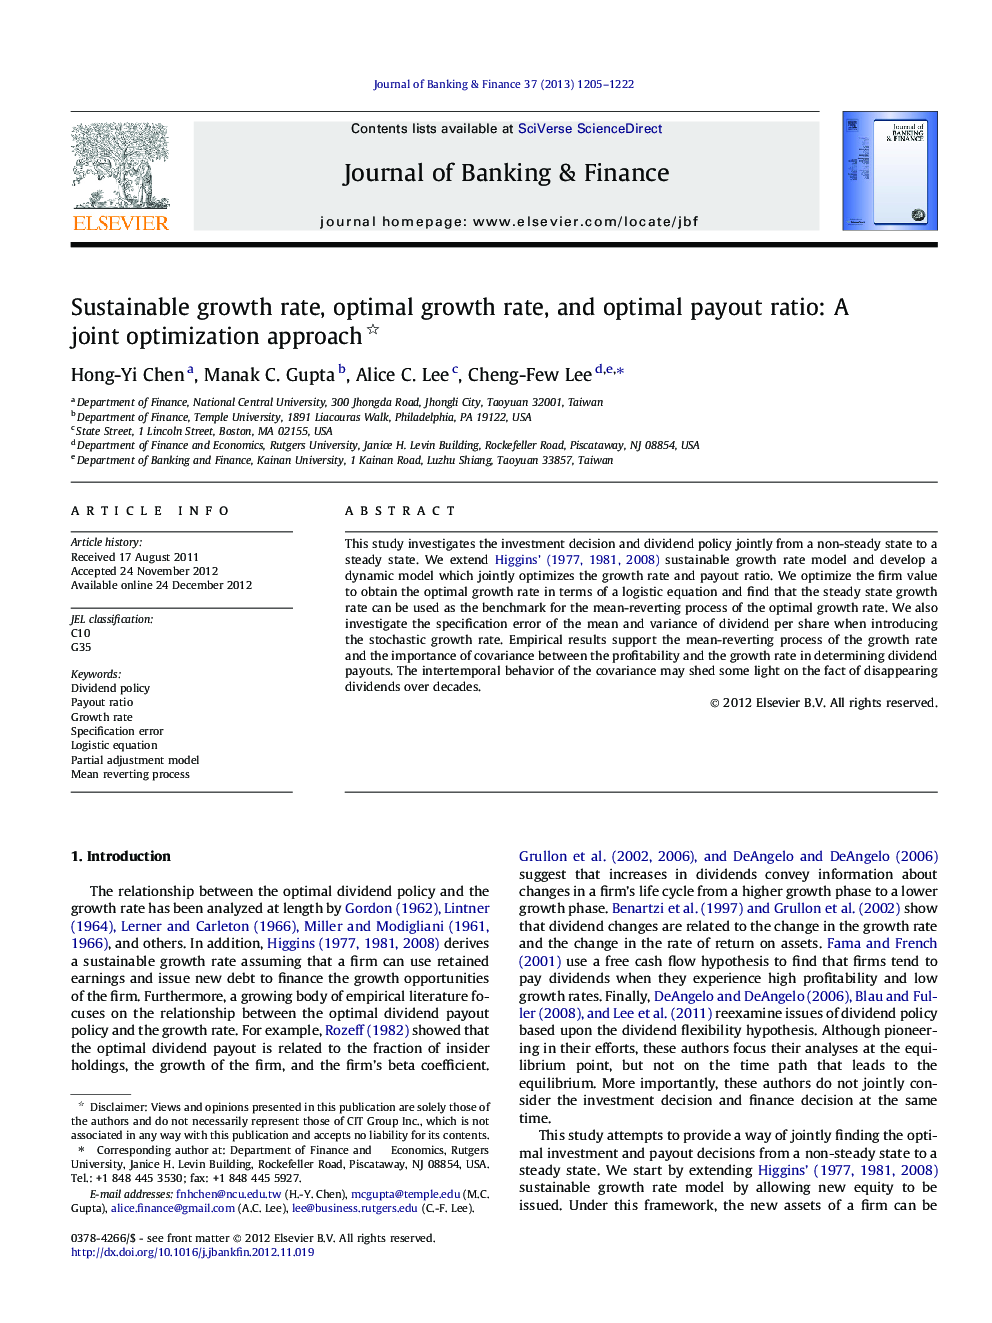 Sustainable growth rate, optimal growth rate, and optimal payout ratio: A joint optimization approach